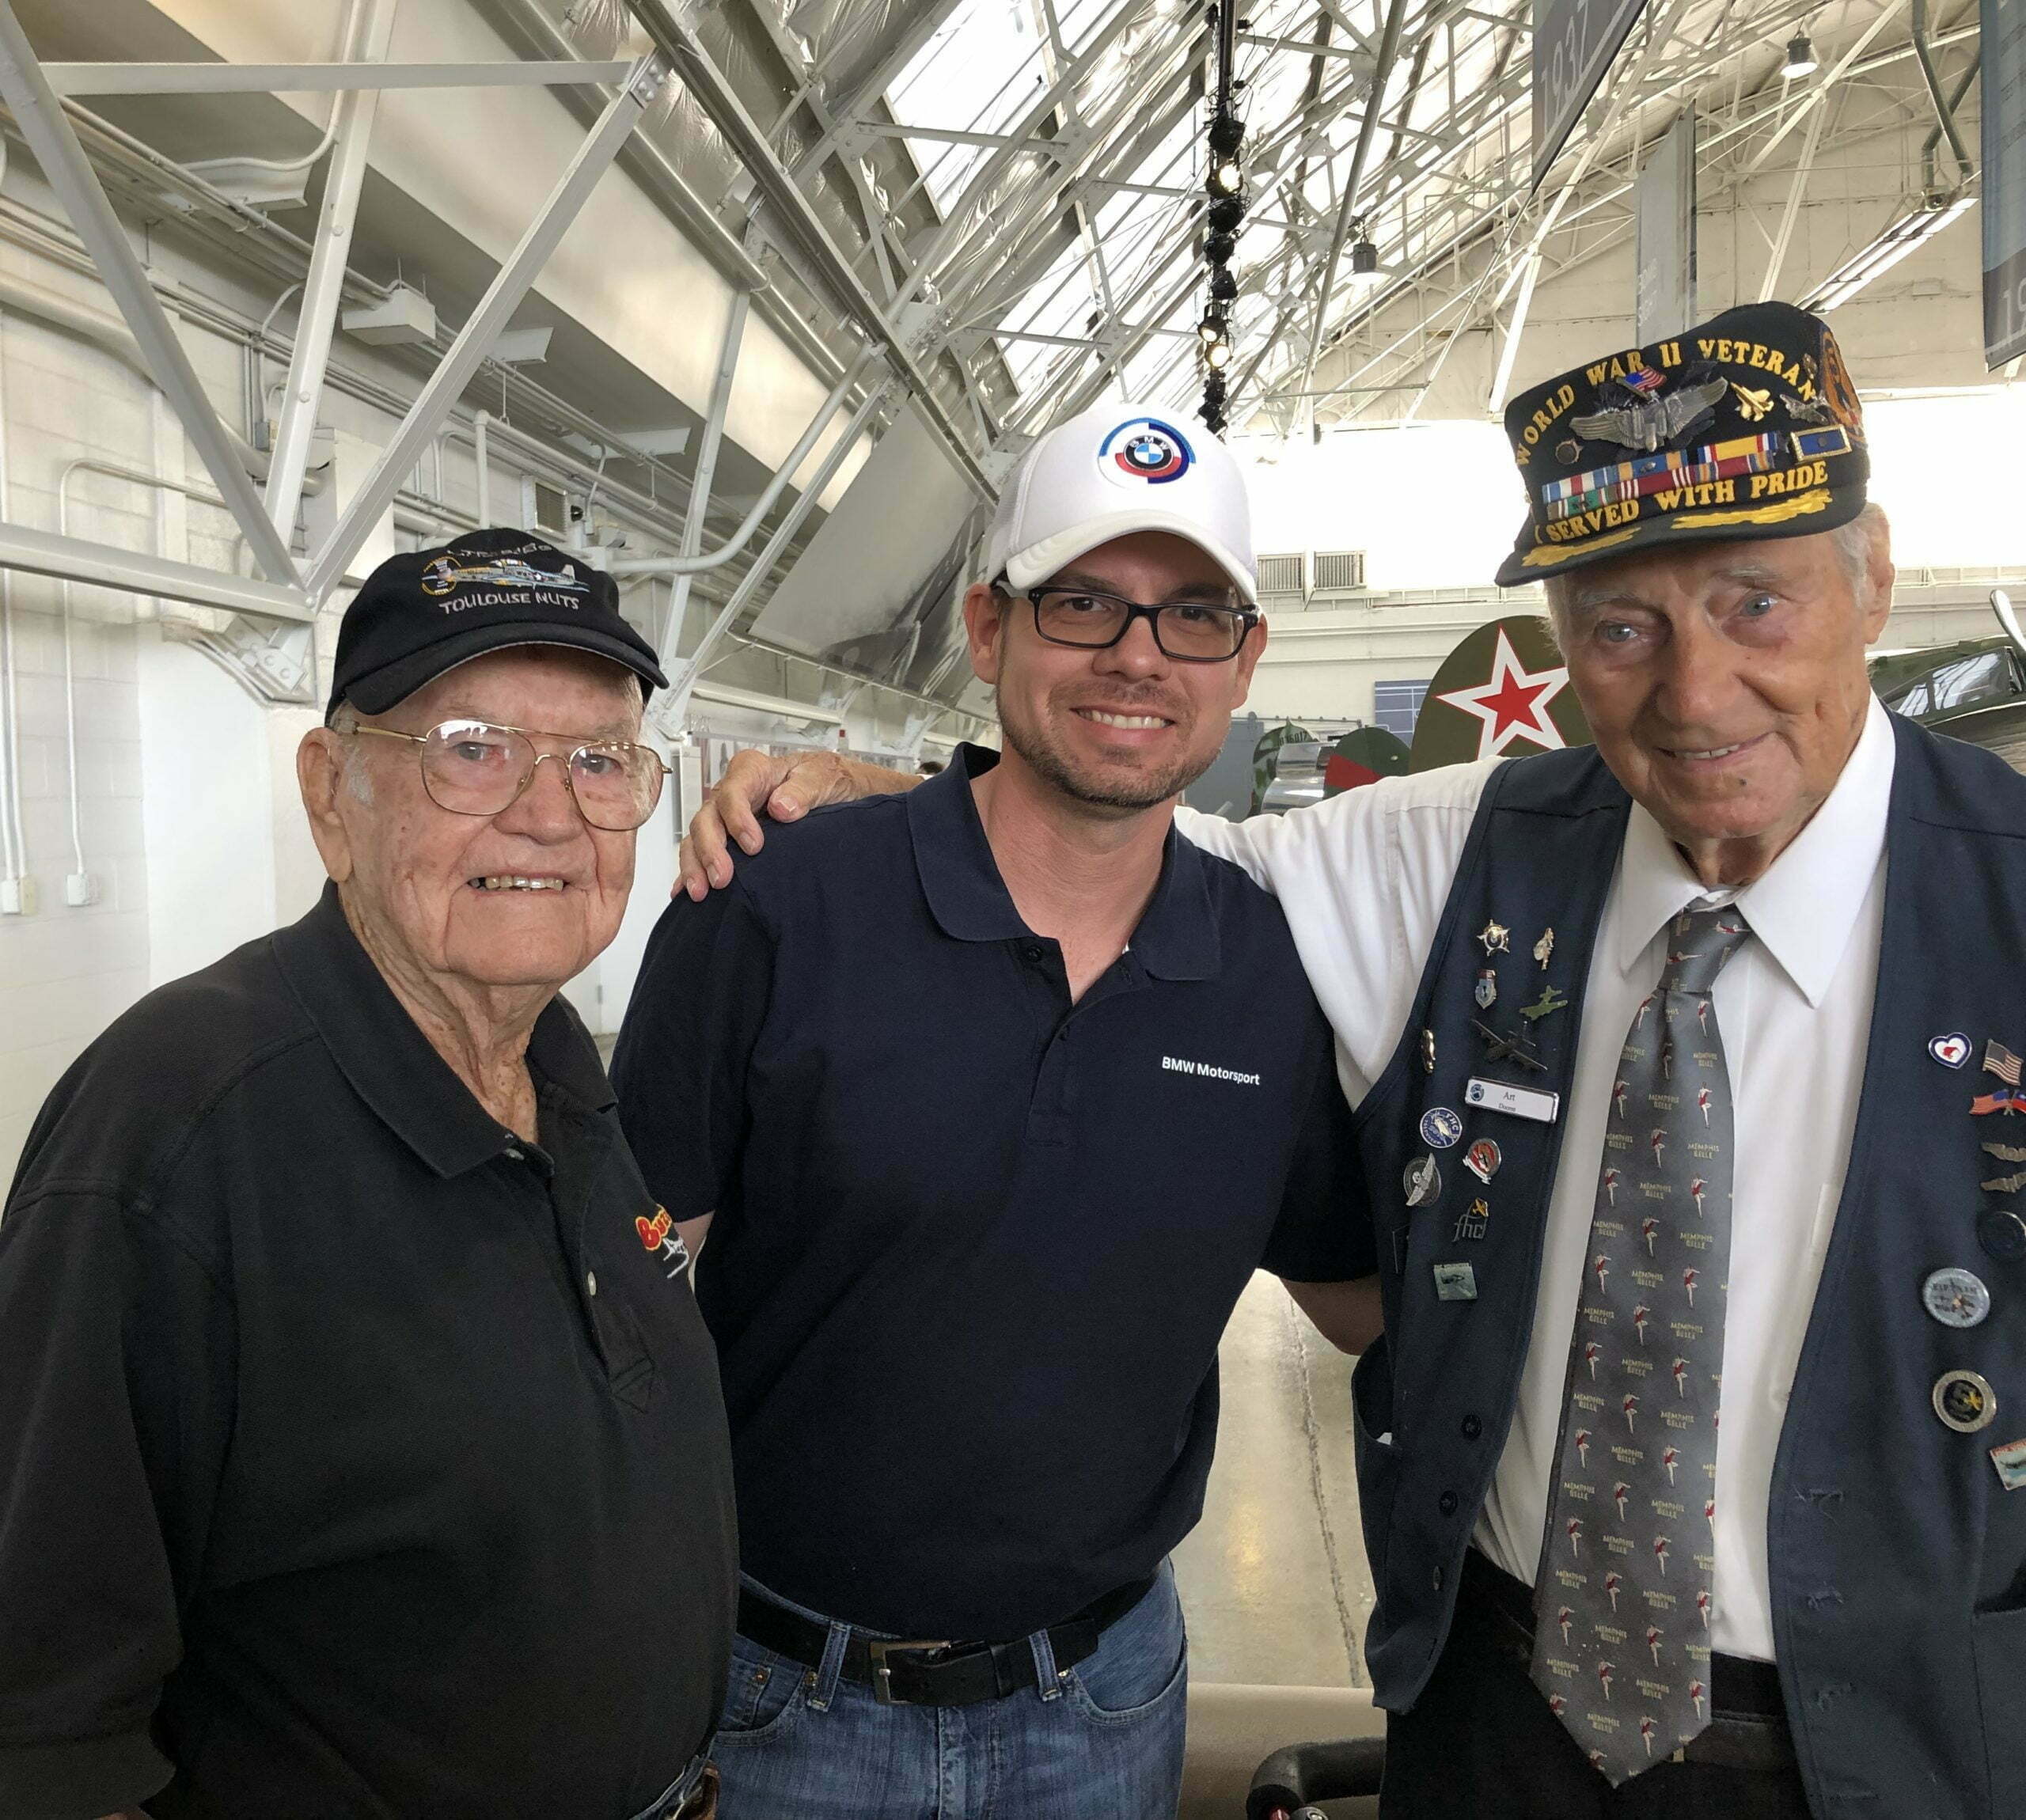 Owner standing with veterans